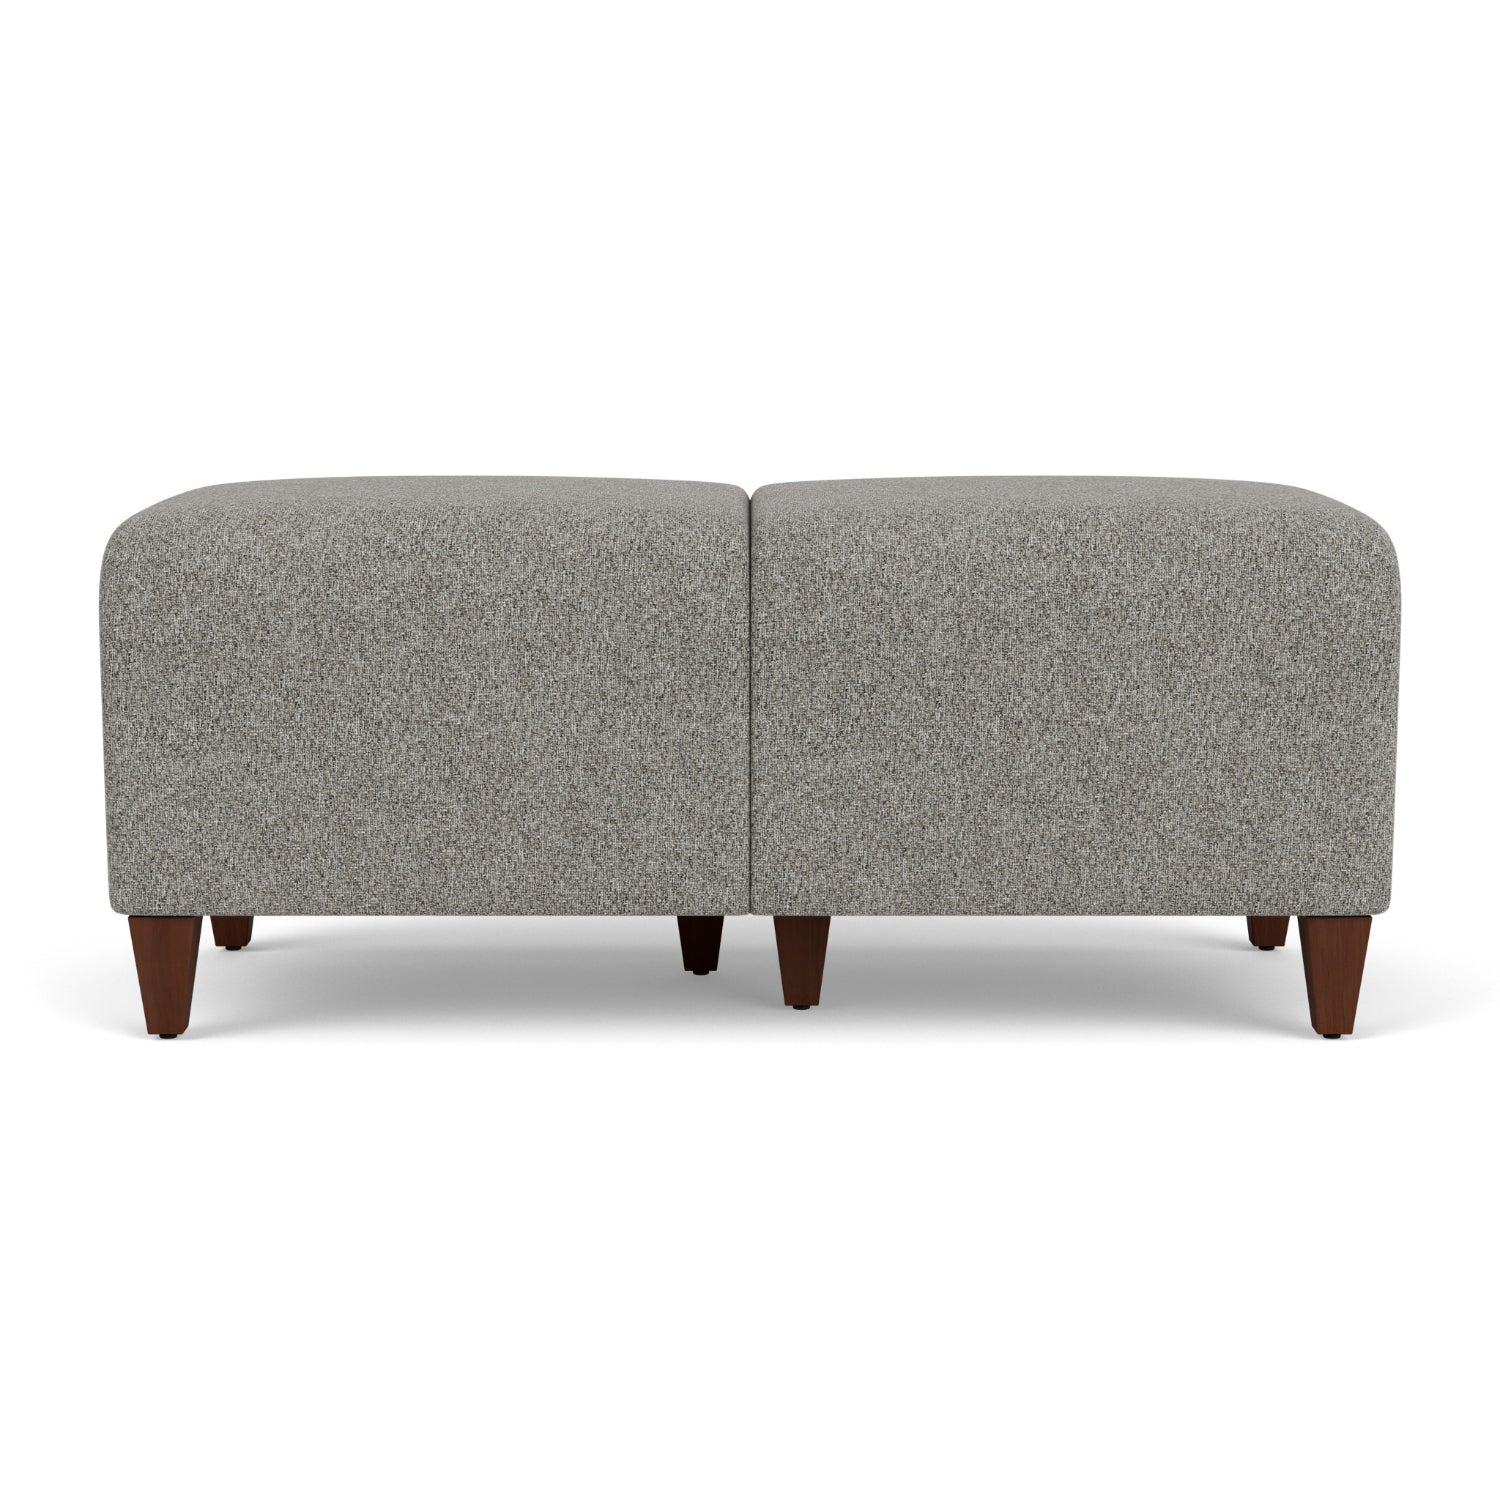 Siena Collection Reception Seating, 2-Seat Bench, Standard Fabric Upholstery, FREE SHIPPING